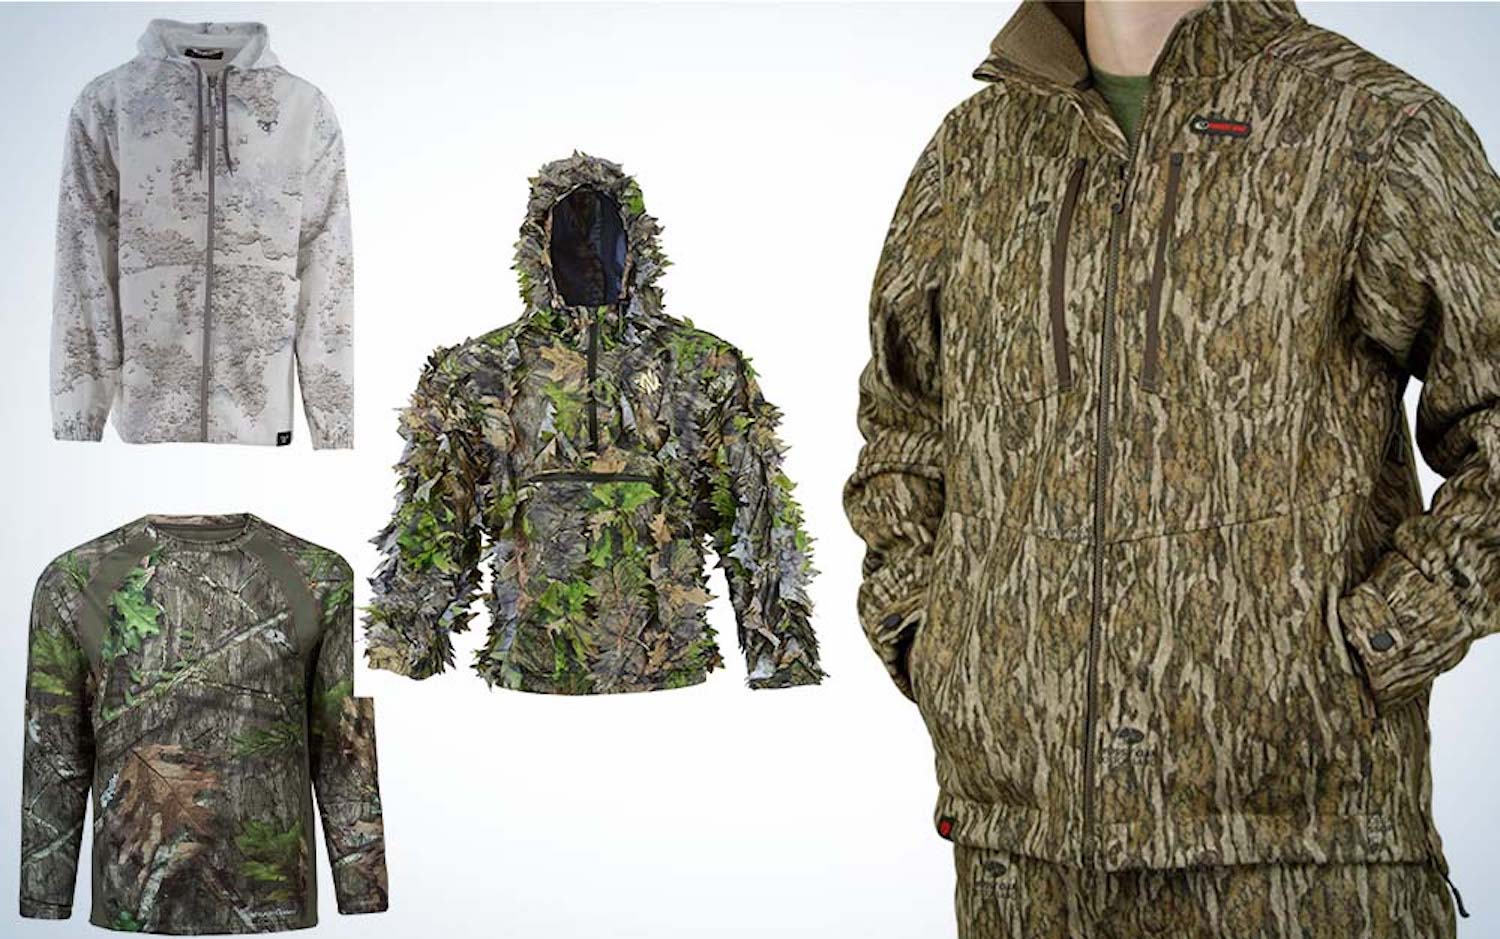 Four jackets with the best camo for turkey hunting